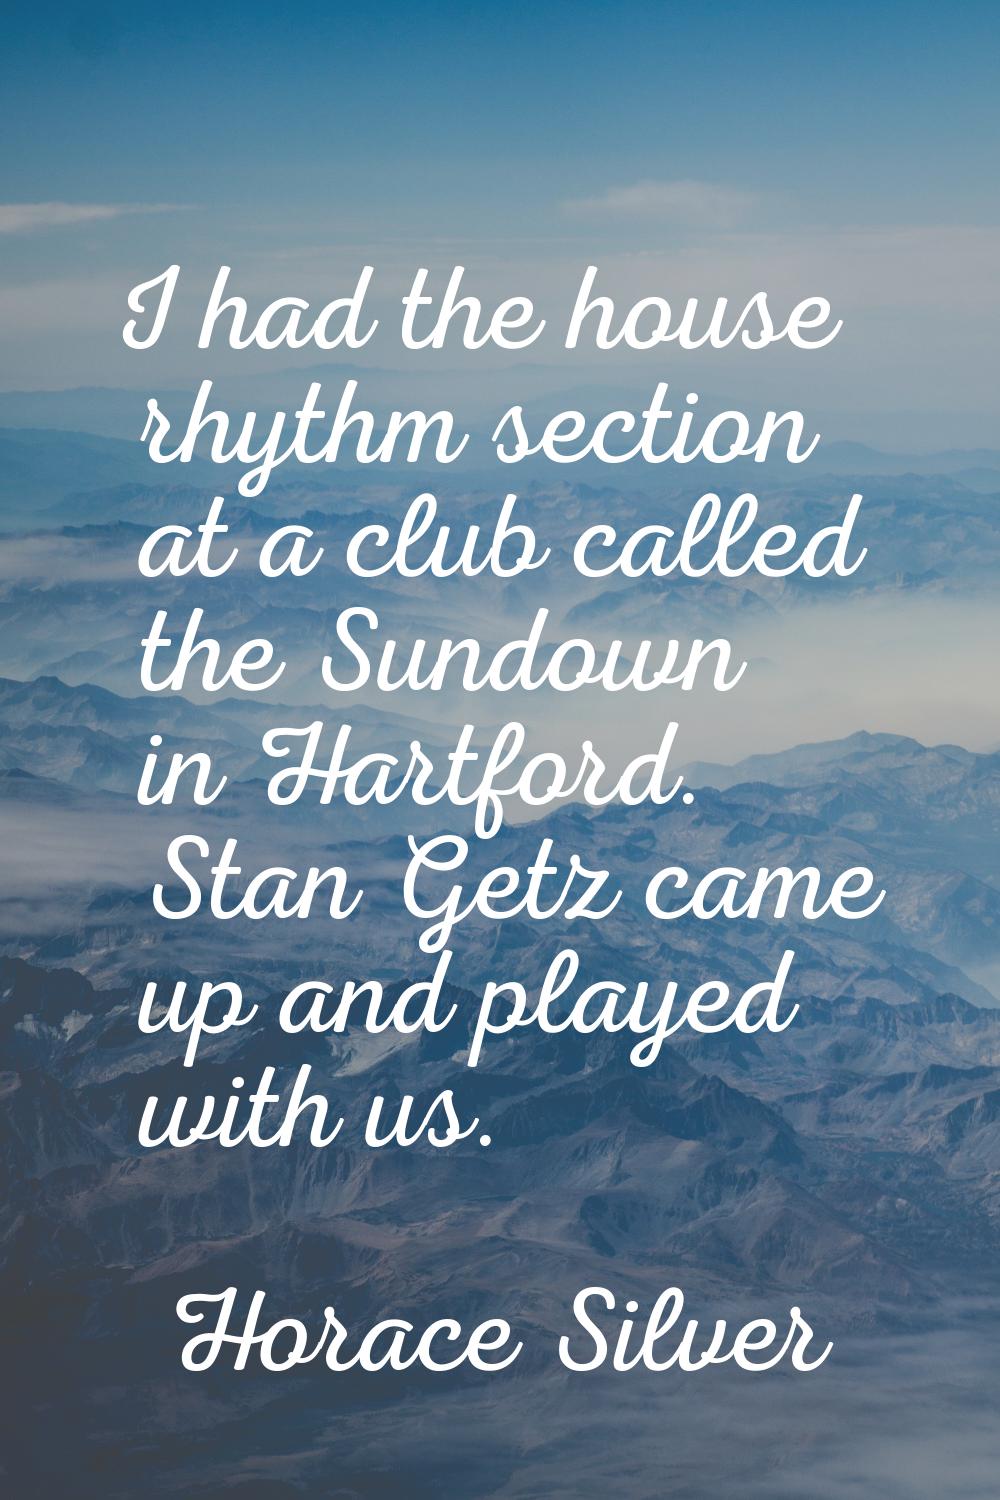 I had the house rhythm section at a club called the Sundown in Hartford. Stan Getz came up and play